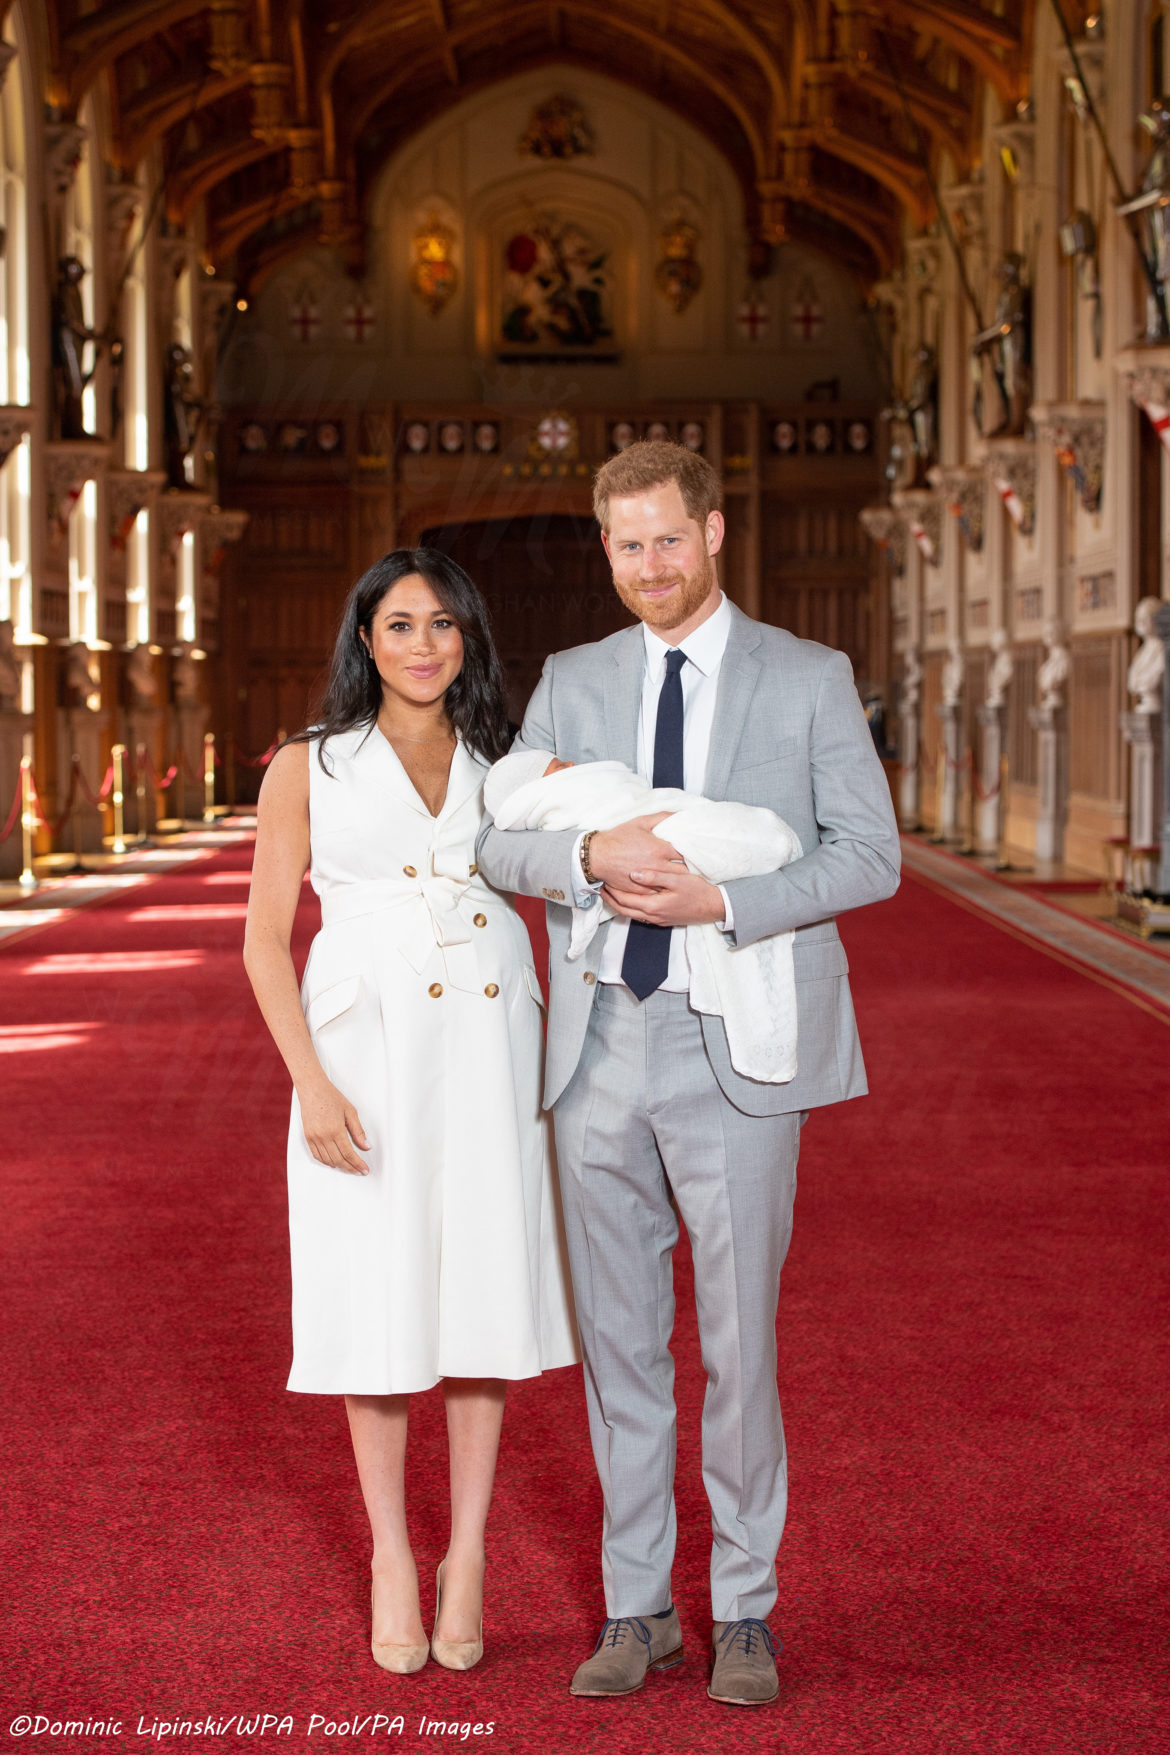 Welcome to the World, Archie Harrison Mountbatten-Windsor!